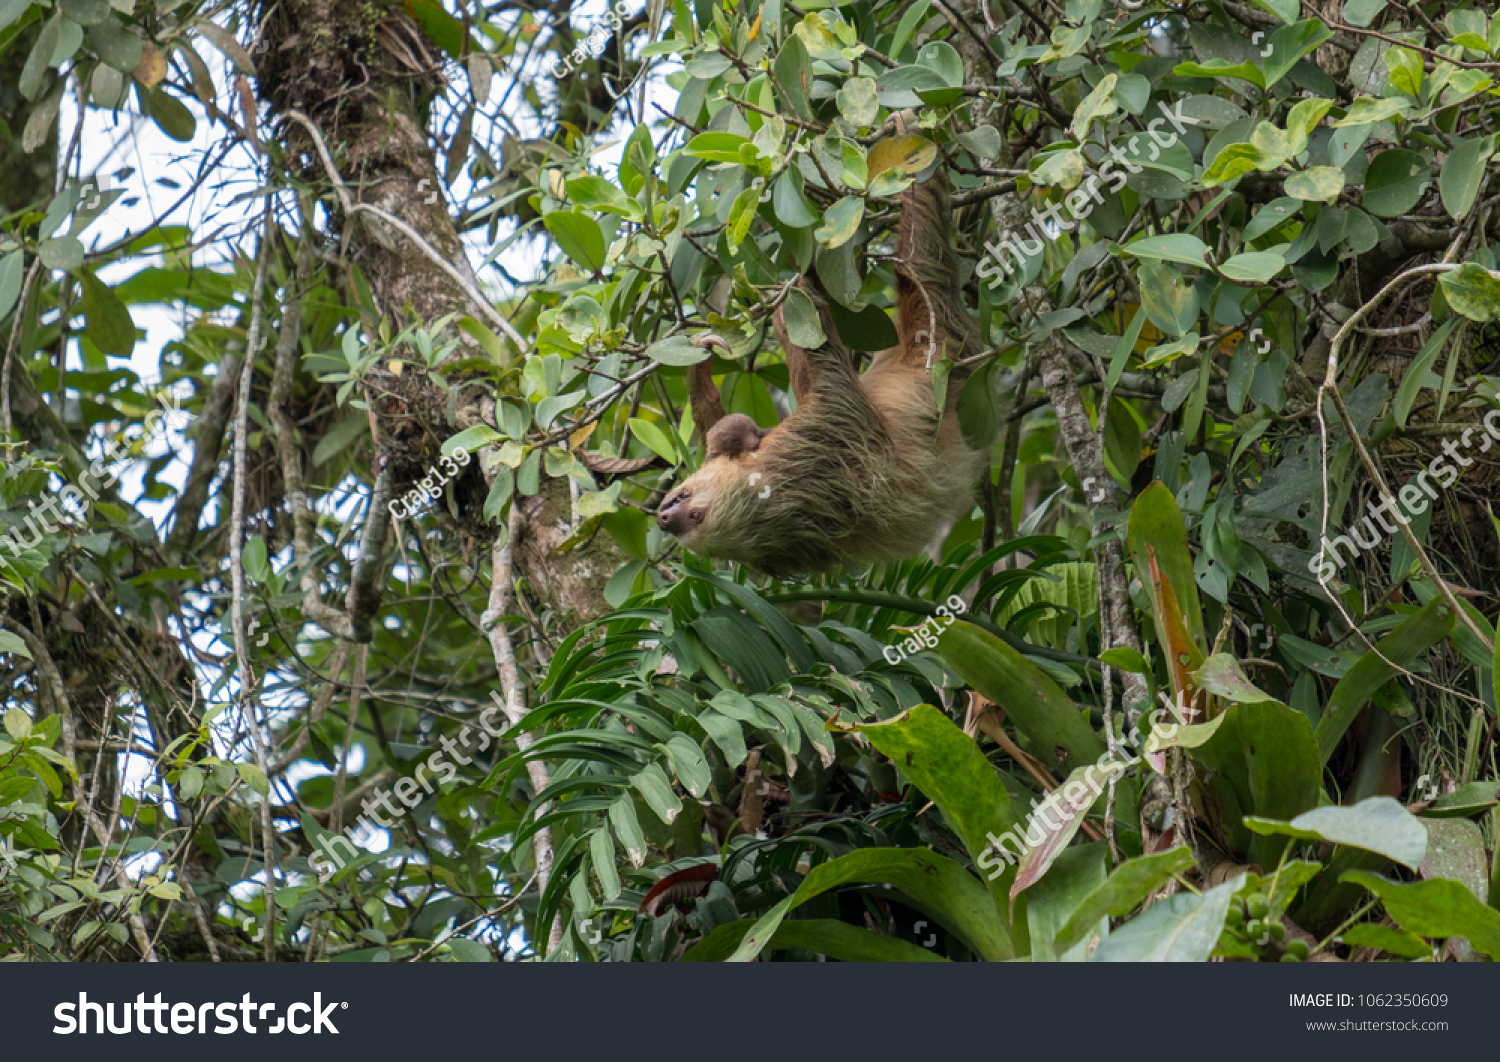 Sloth hanging from a tree with it's offspring in hand. #1062350609